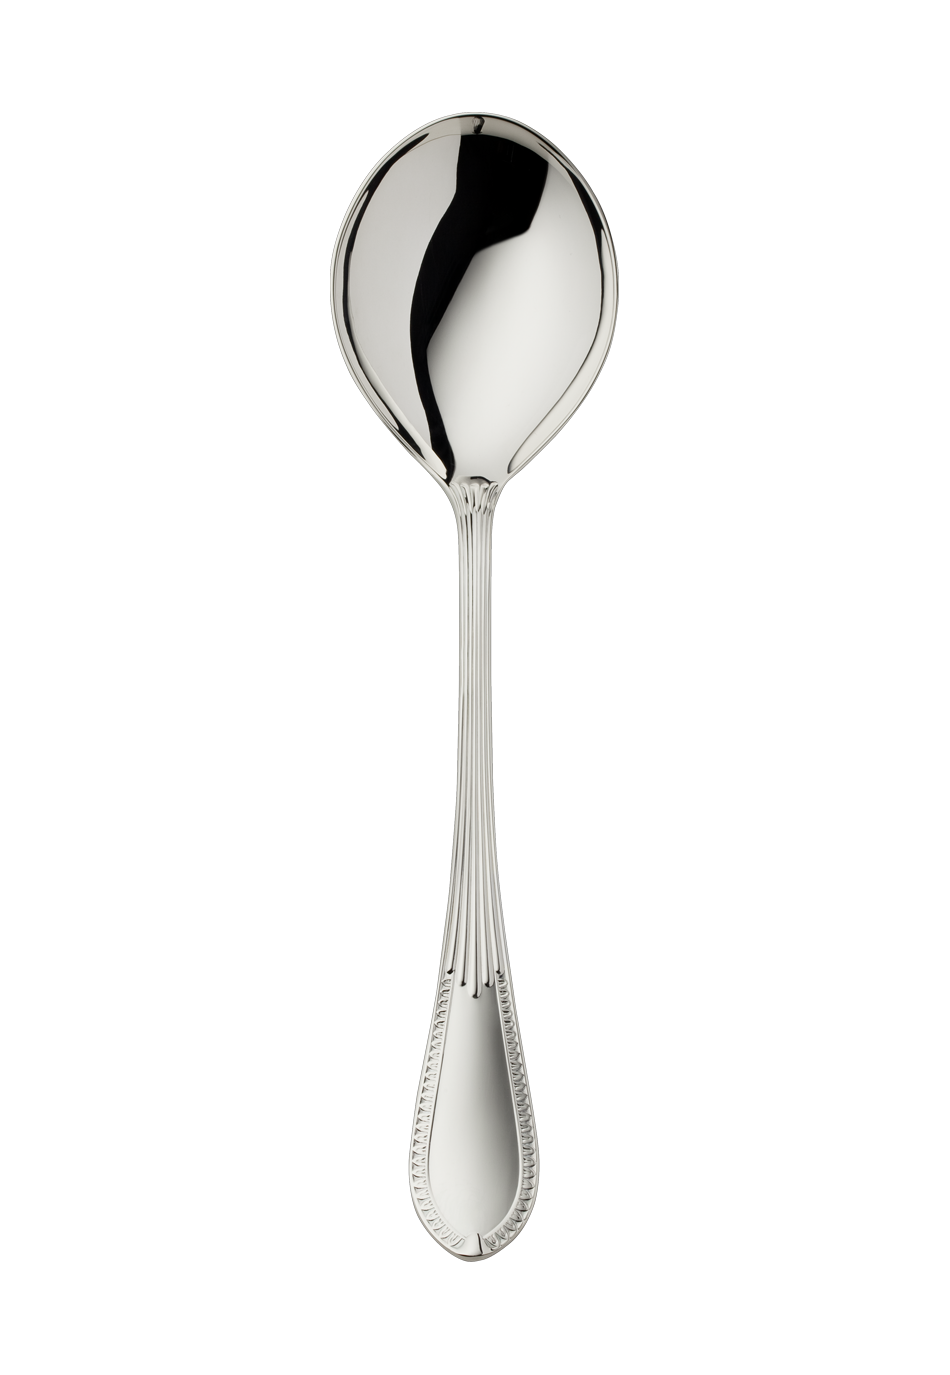 Belvedere Compote/Salad Serving Spoon, large (150g massive silverplated)